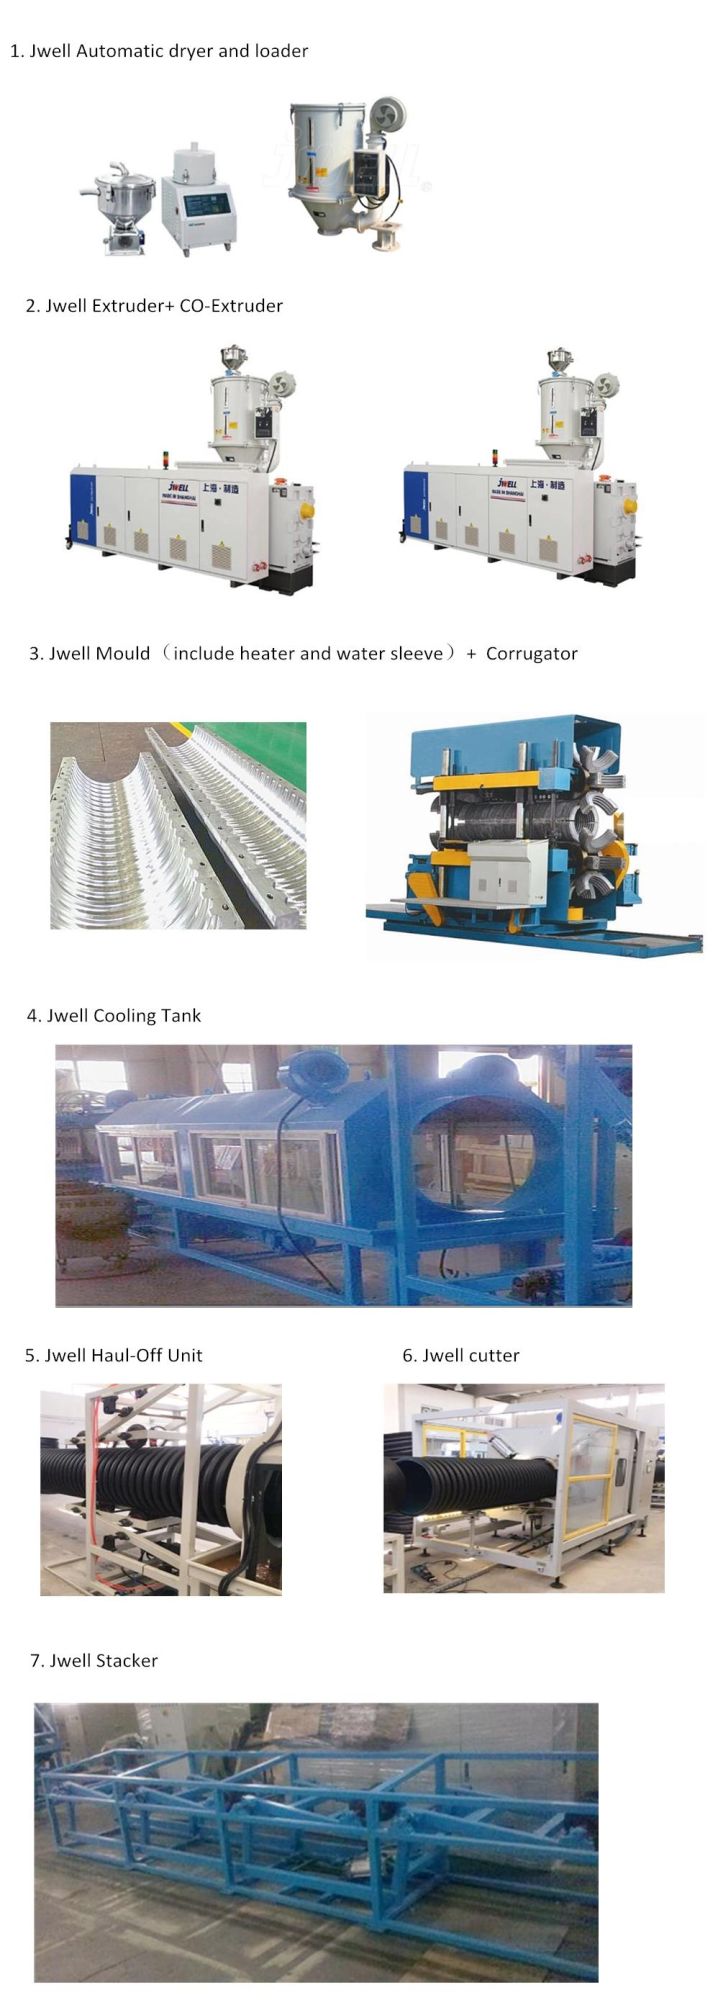 HDPE Double Wall Corrugated Pipe Extrusion Line / Dwc Pipe Making Machine Production Line